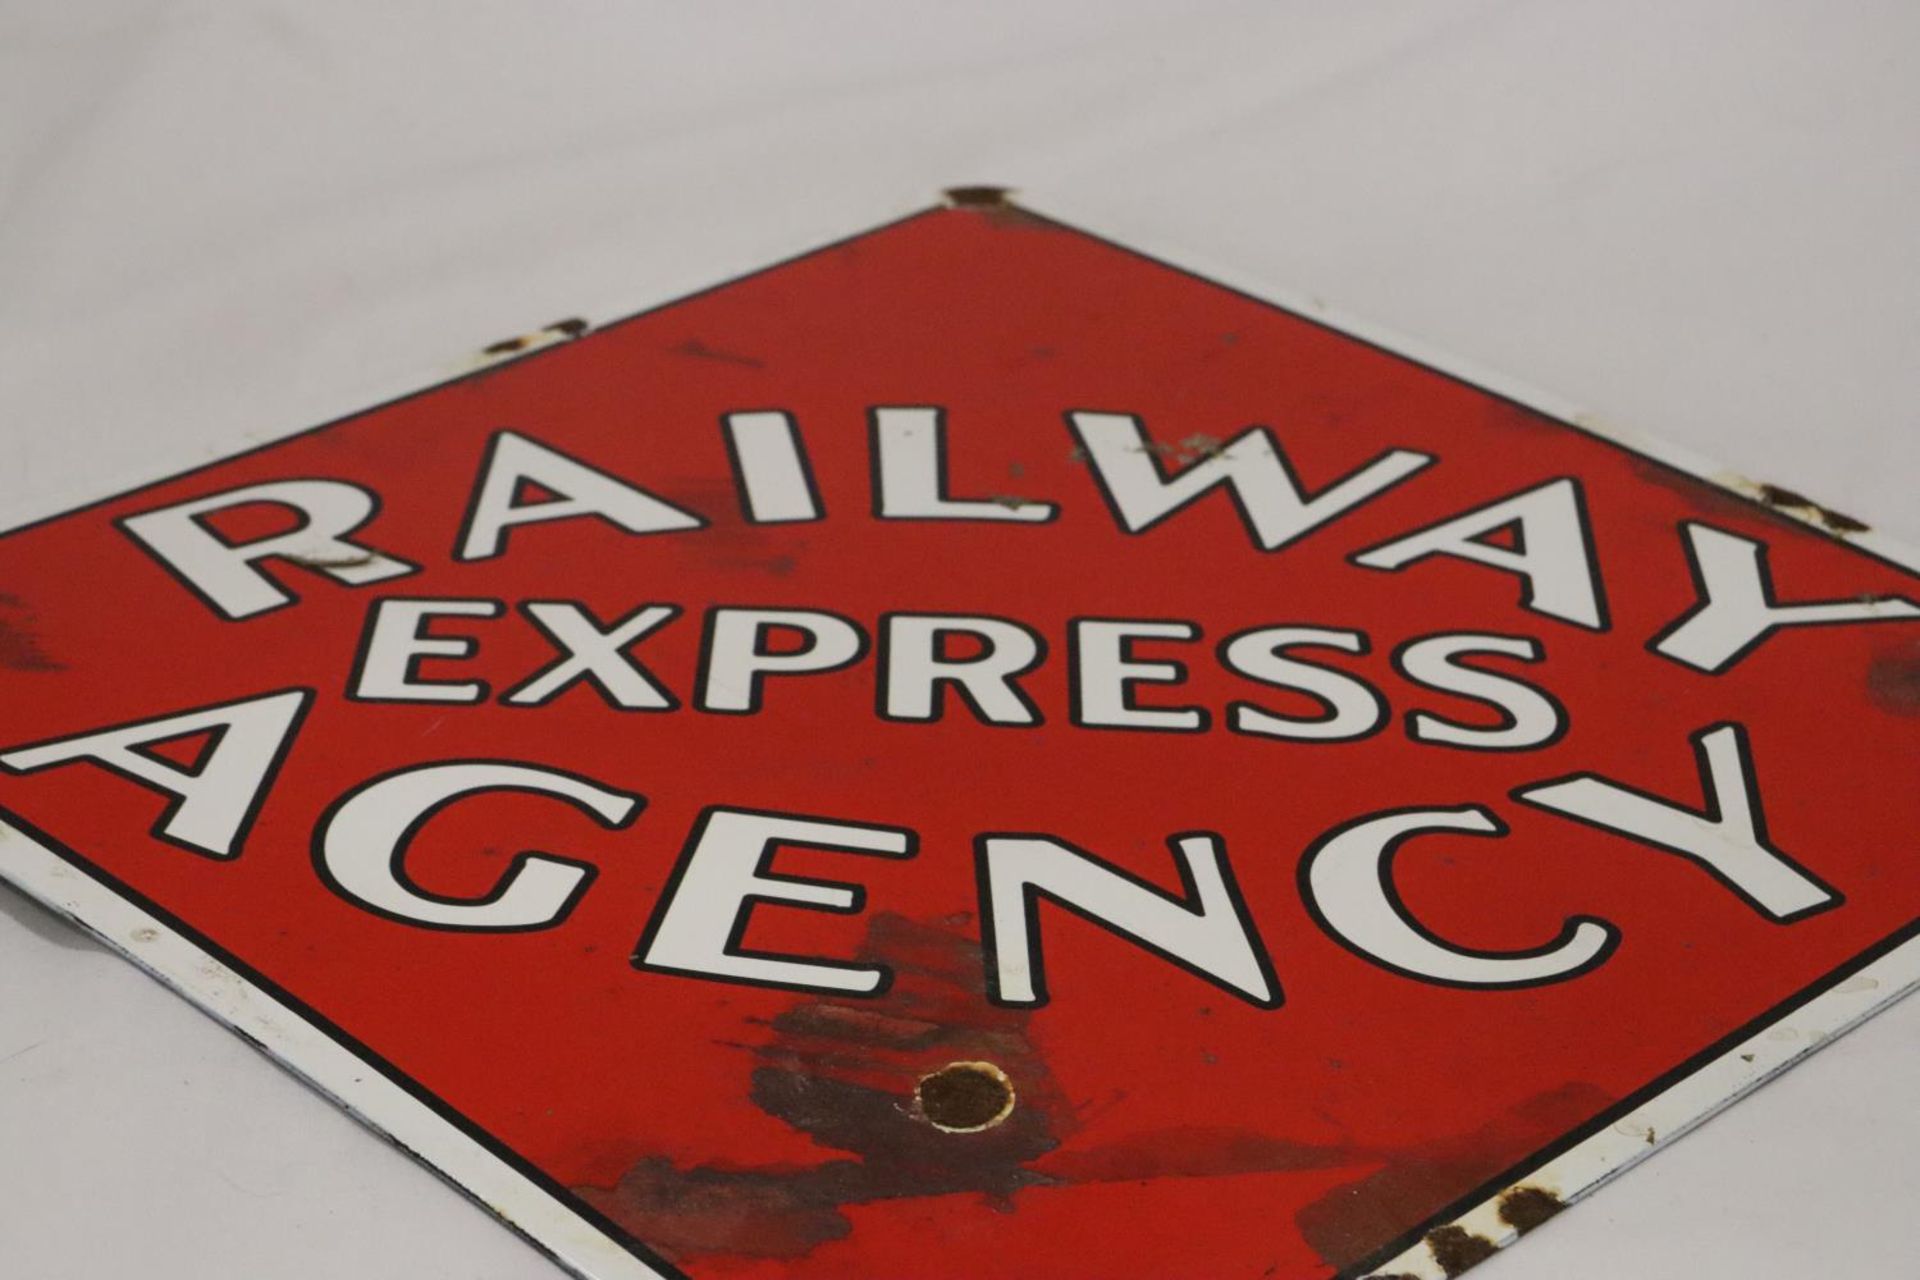 AN ENAMEL RAILWAY EXPRESS AGENCY SIGN - Image 2 of 3